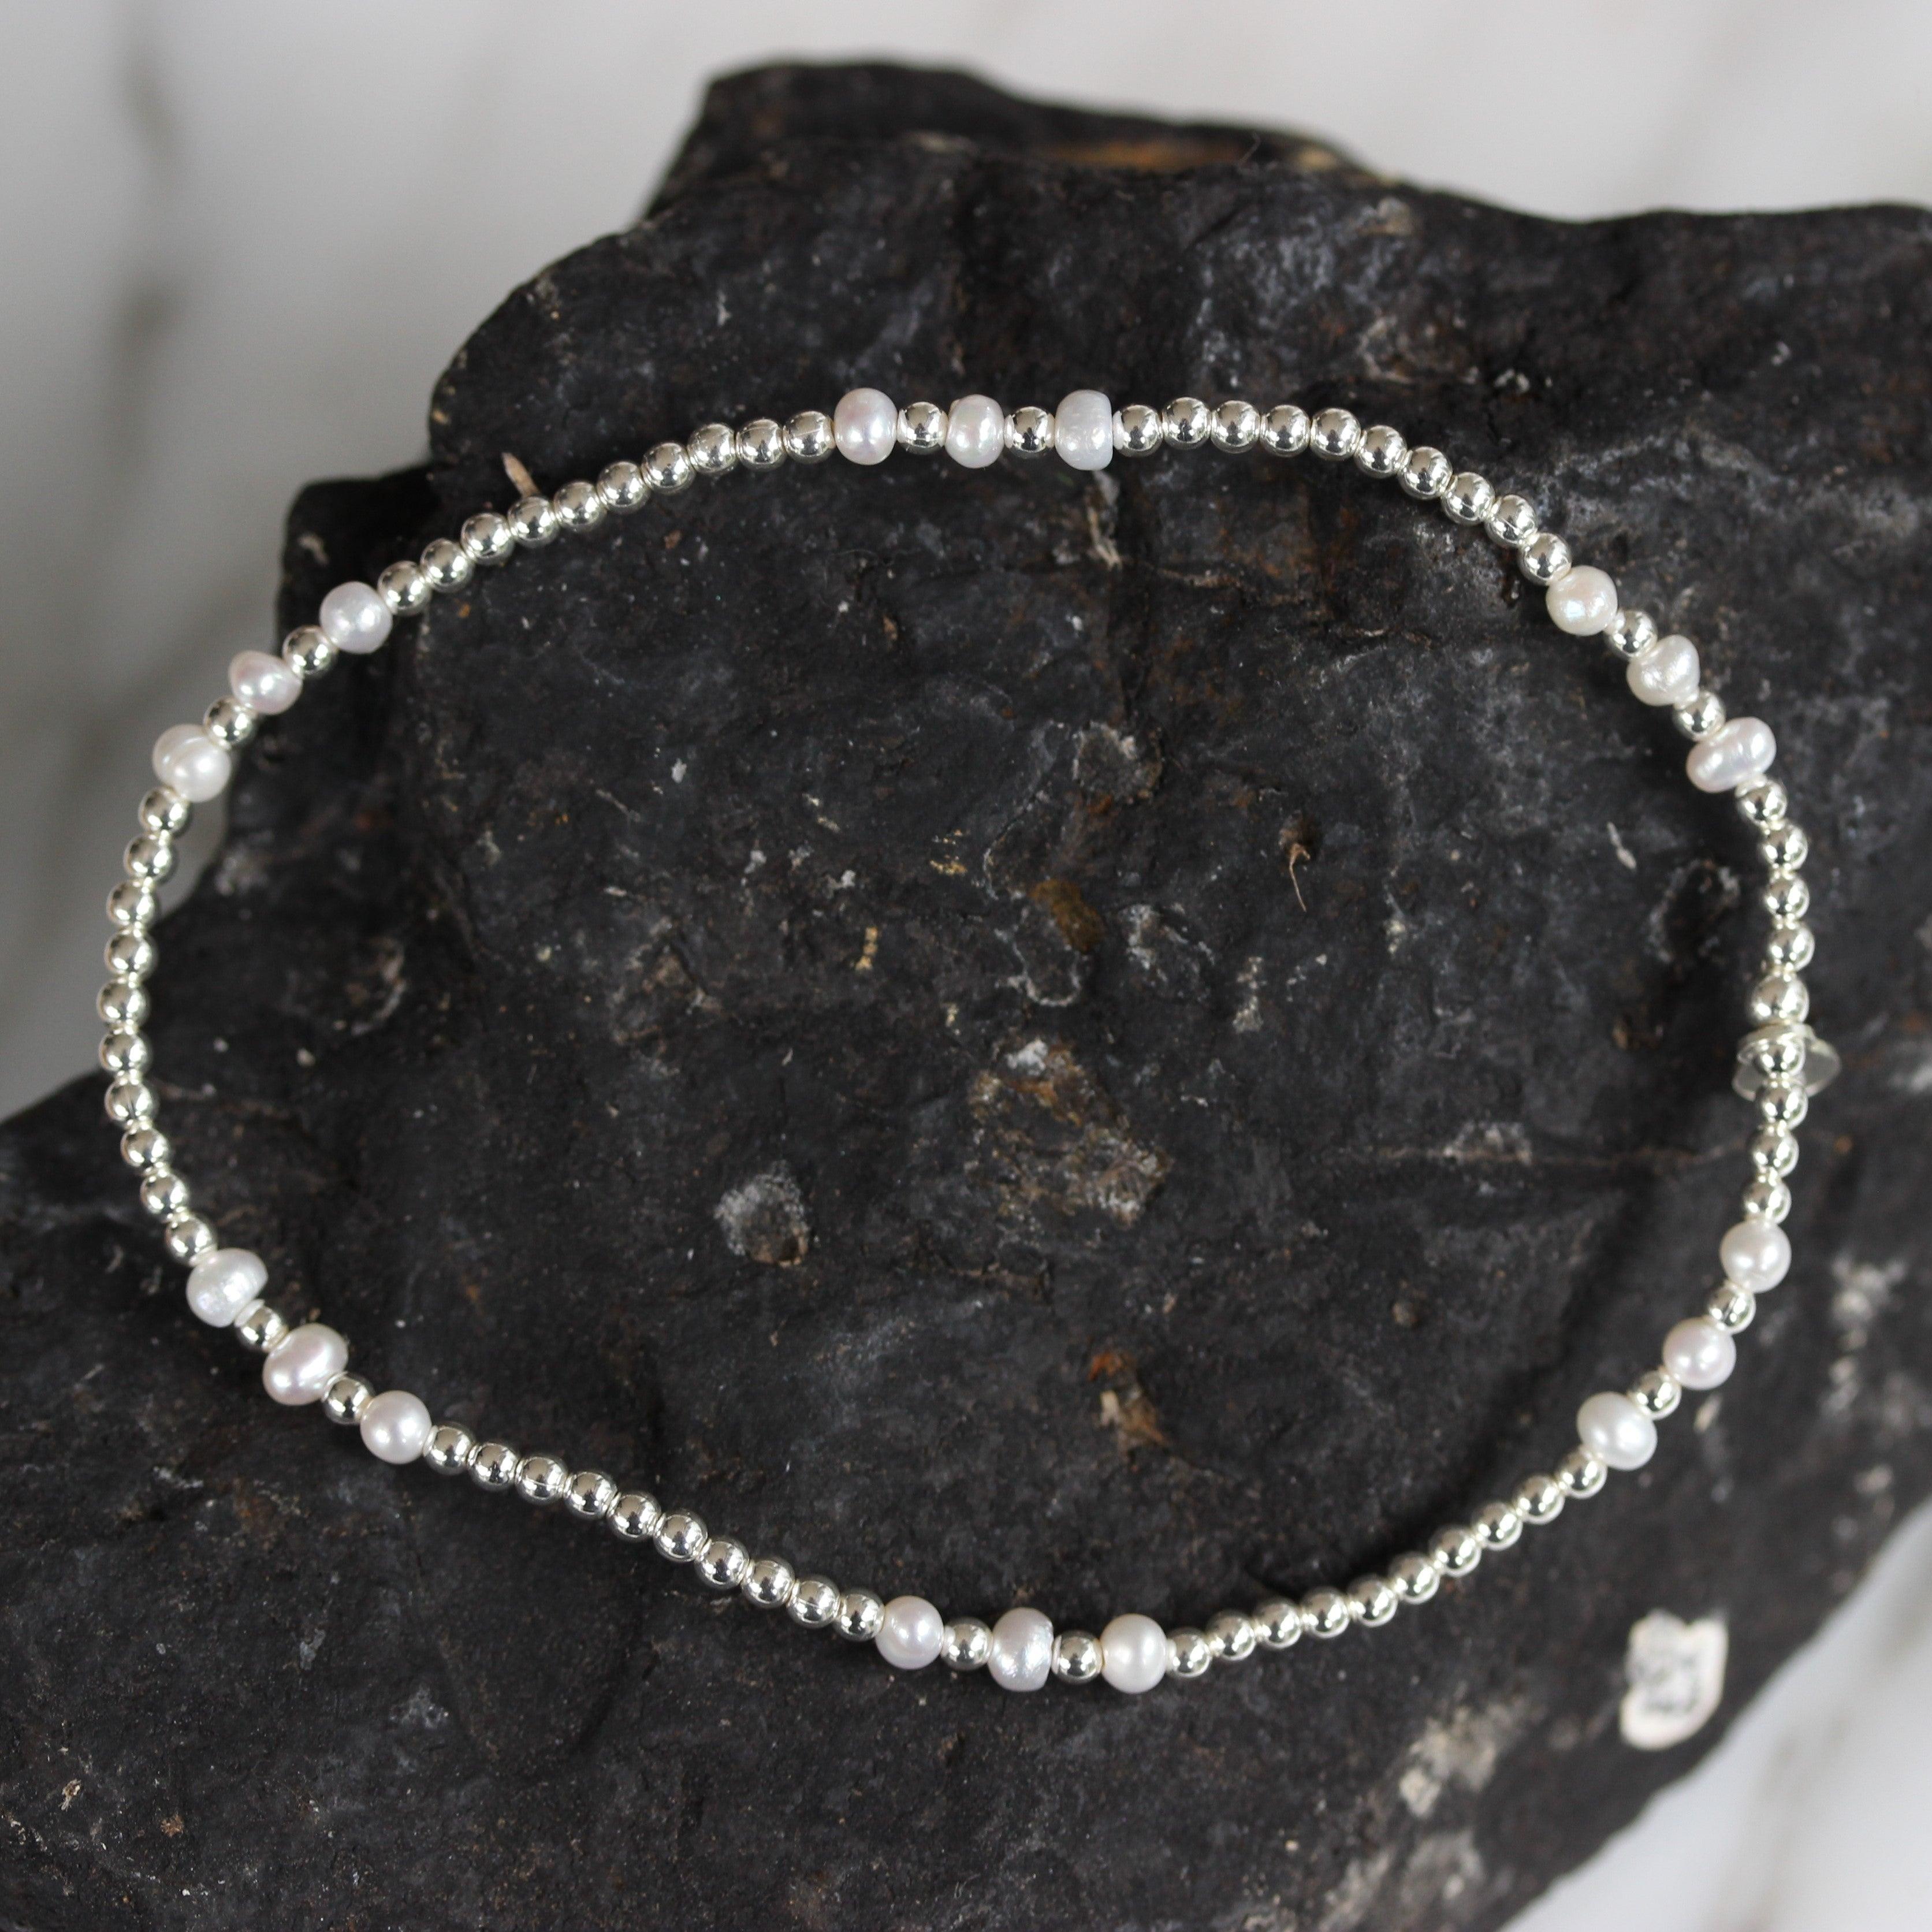 Sterling Silver 2 x 3mm Small Bead Balls & Pearl 18cm Stretch Bracelet - STERLING SILVER DESIGNS